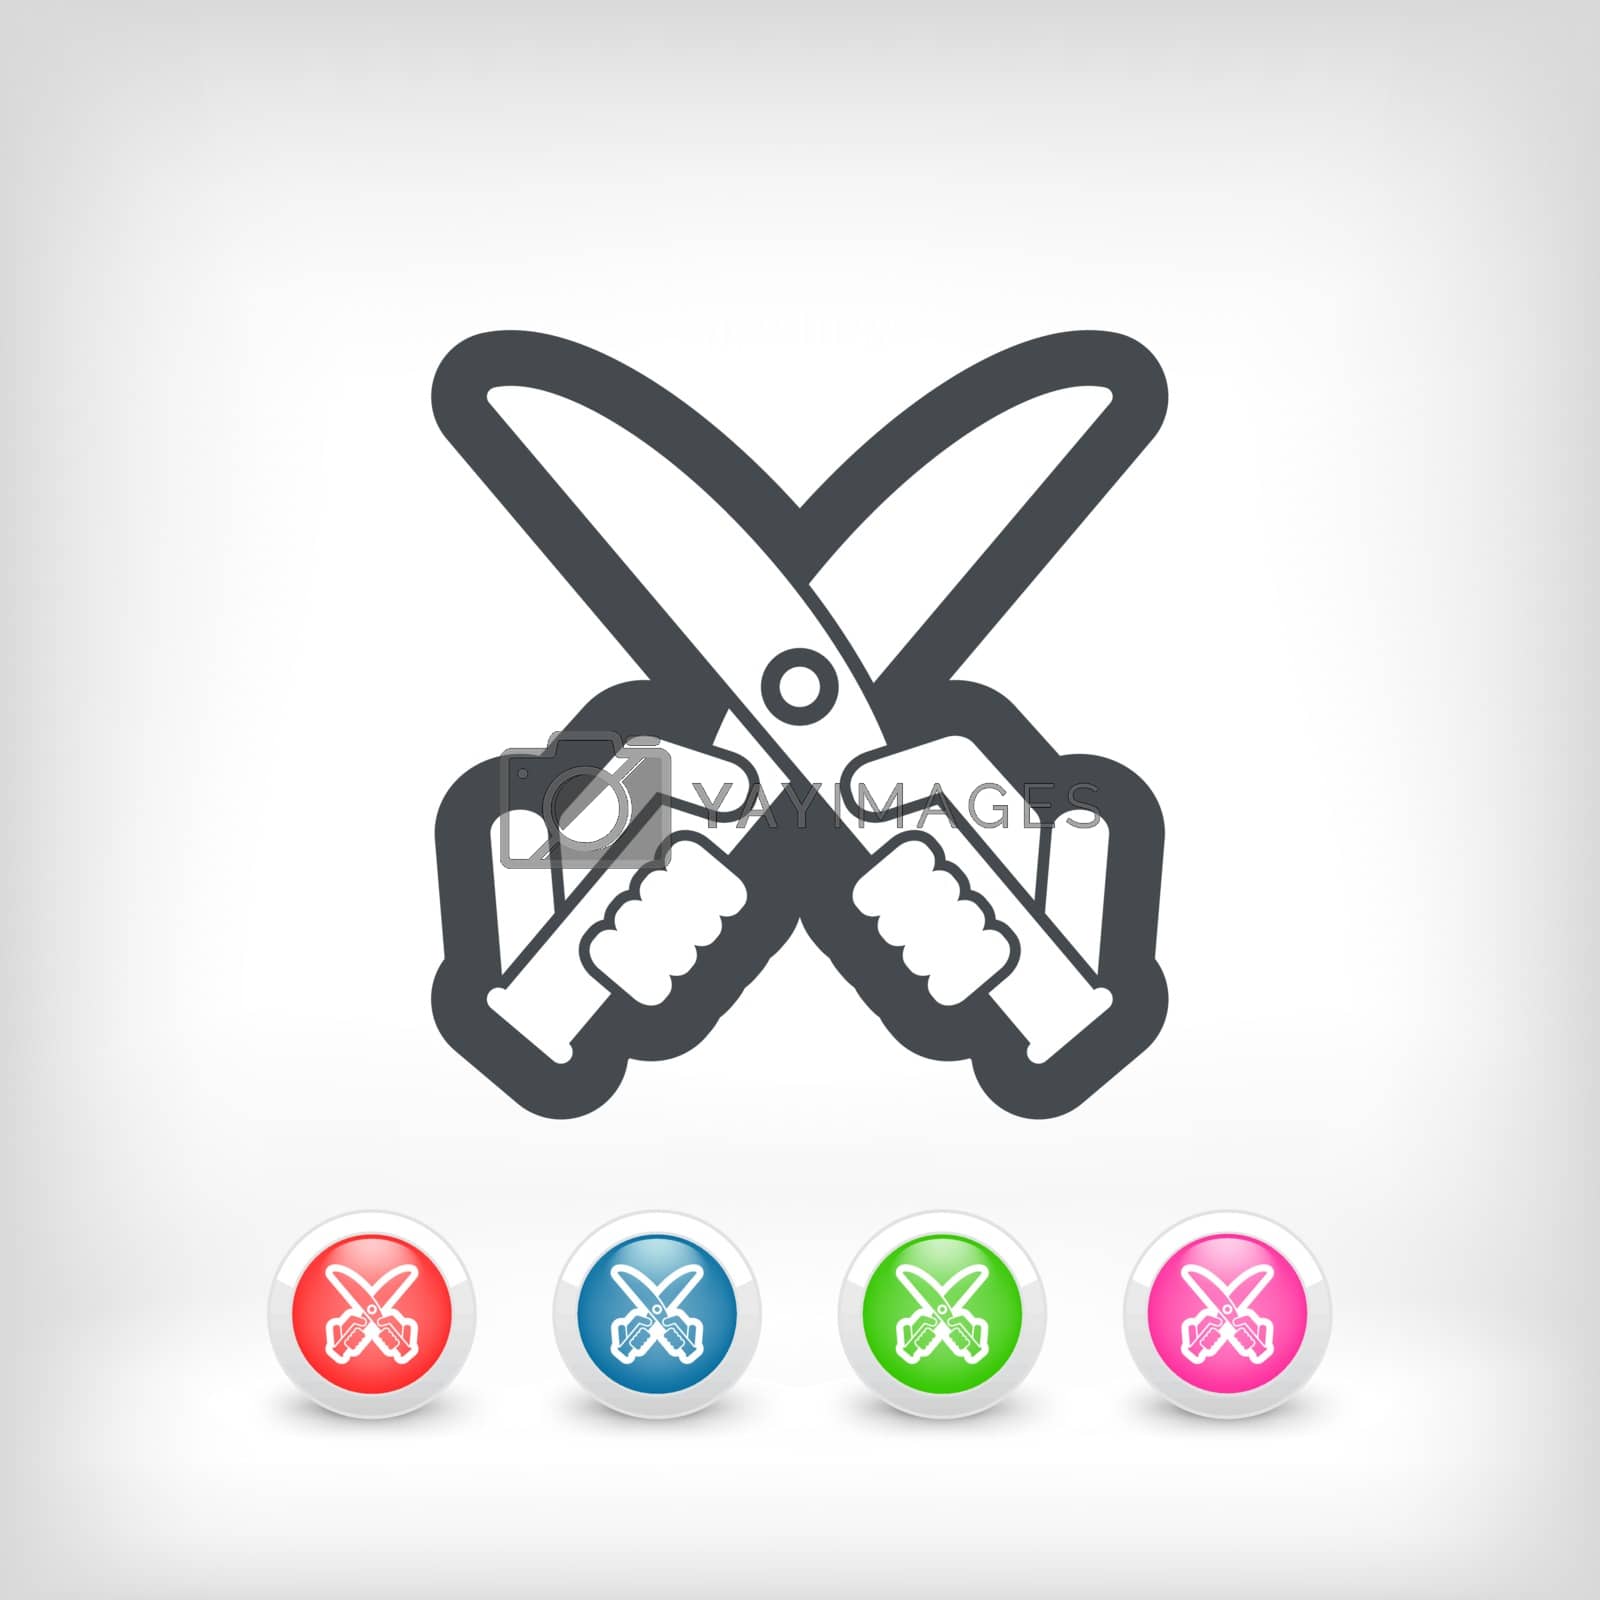 Royalty free image of Shears icon by myVector